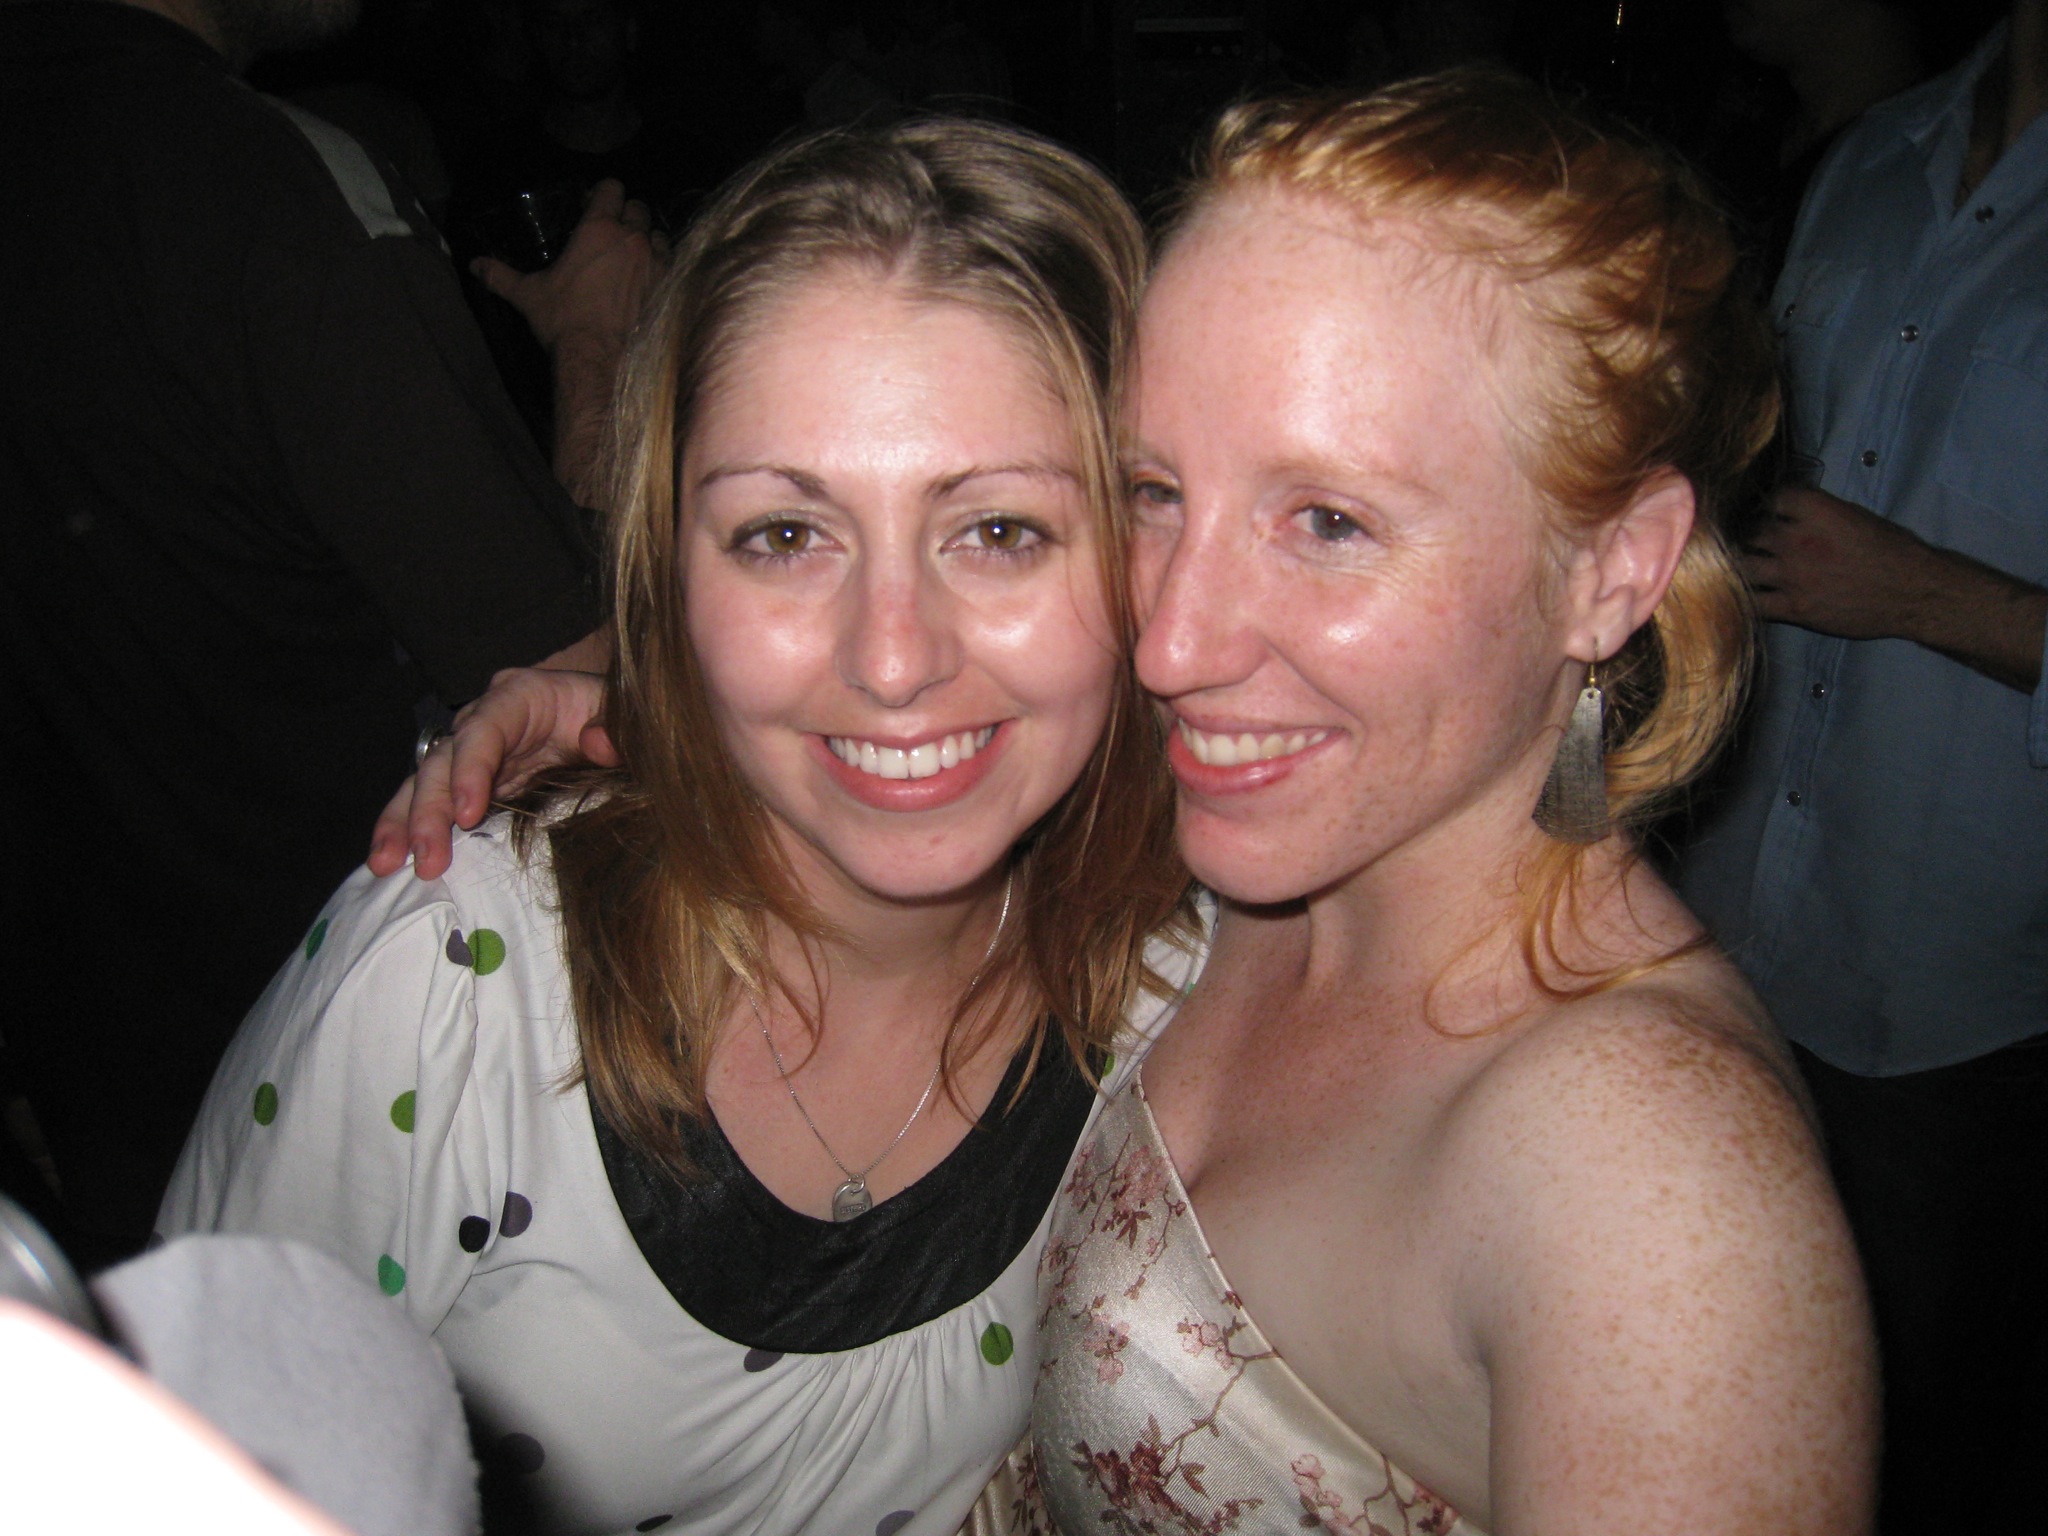 two women standing next to each other in a dark room